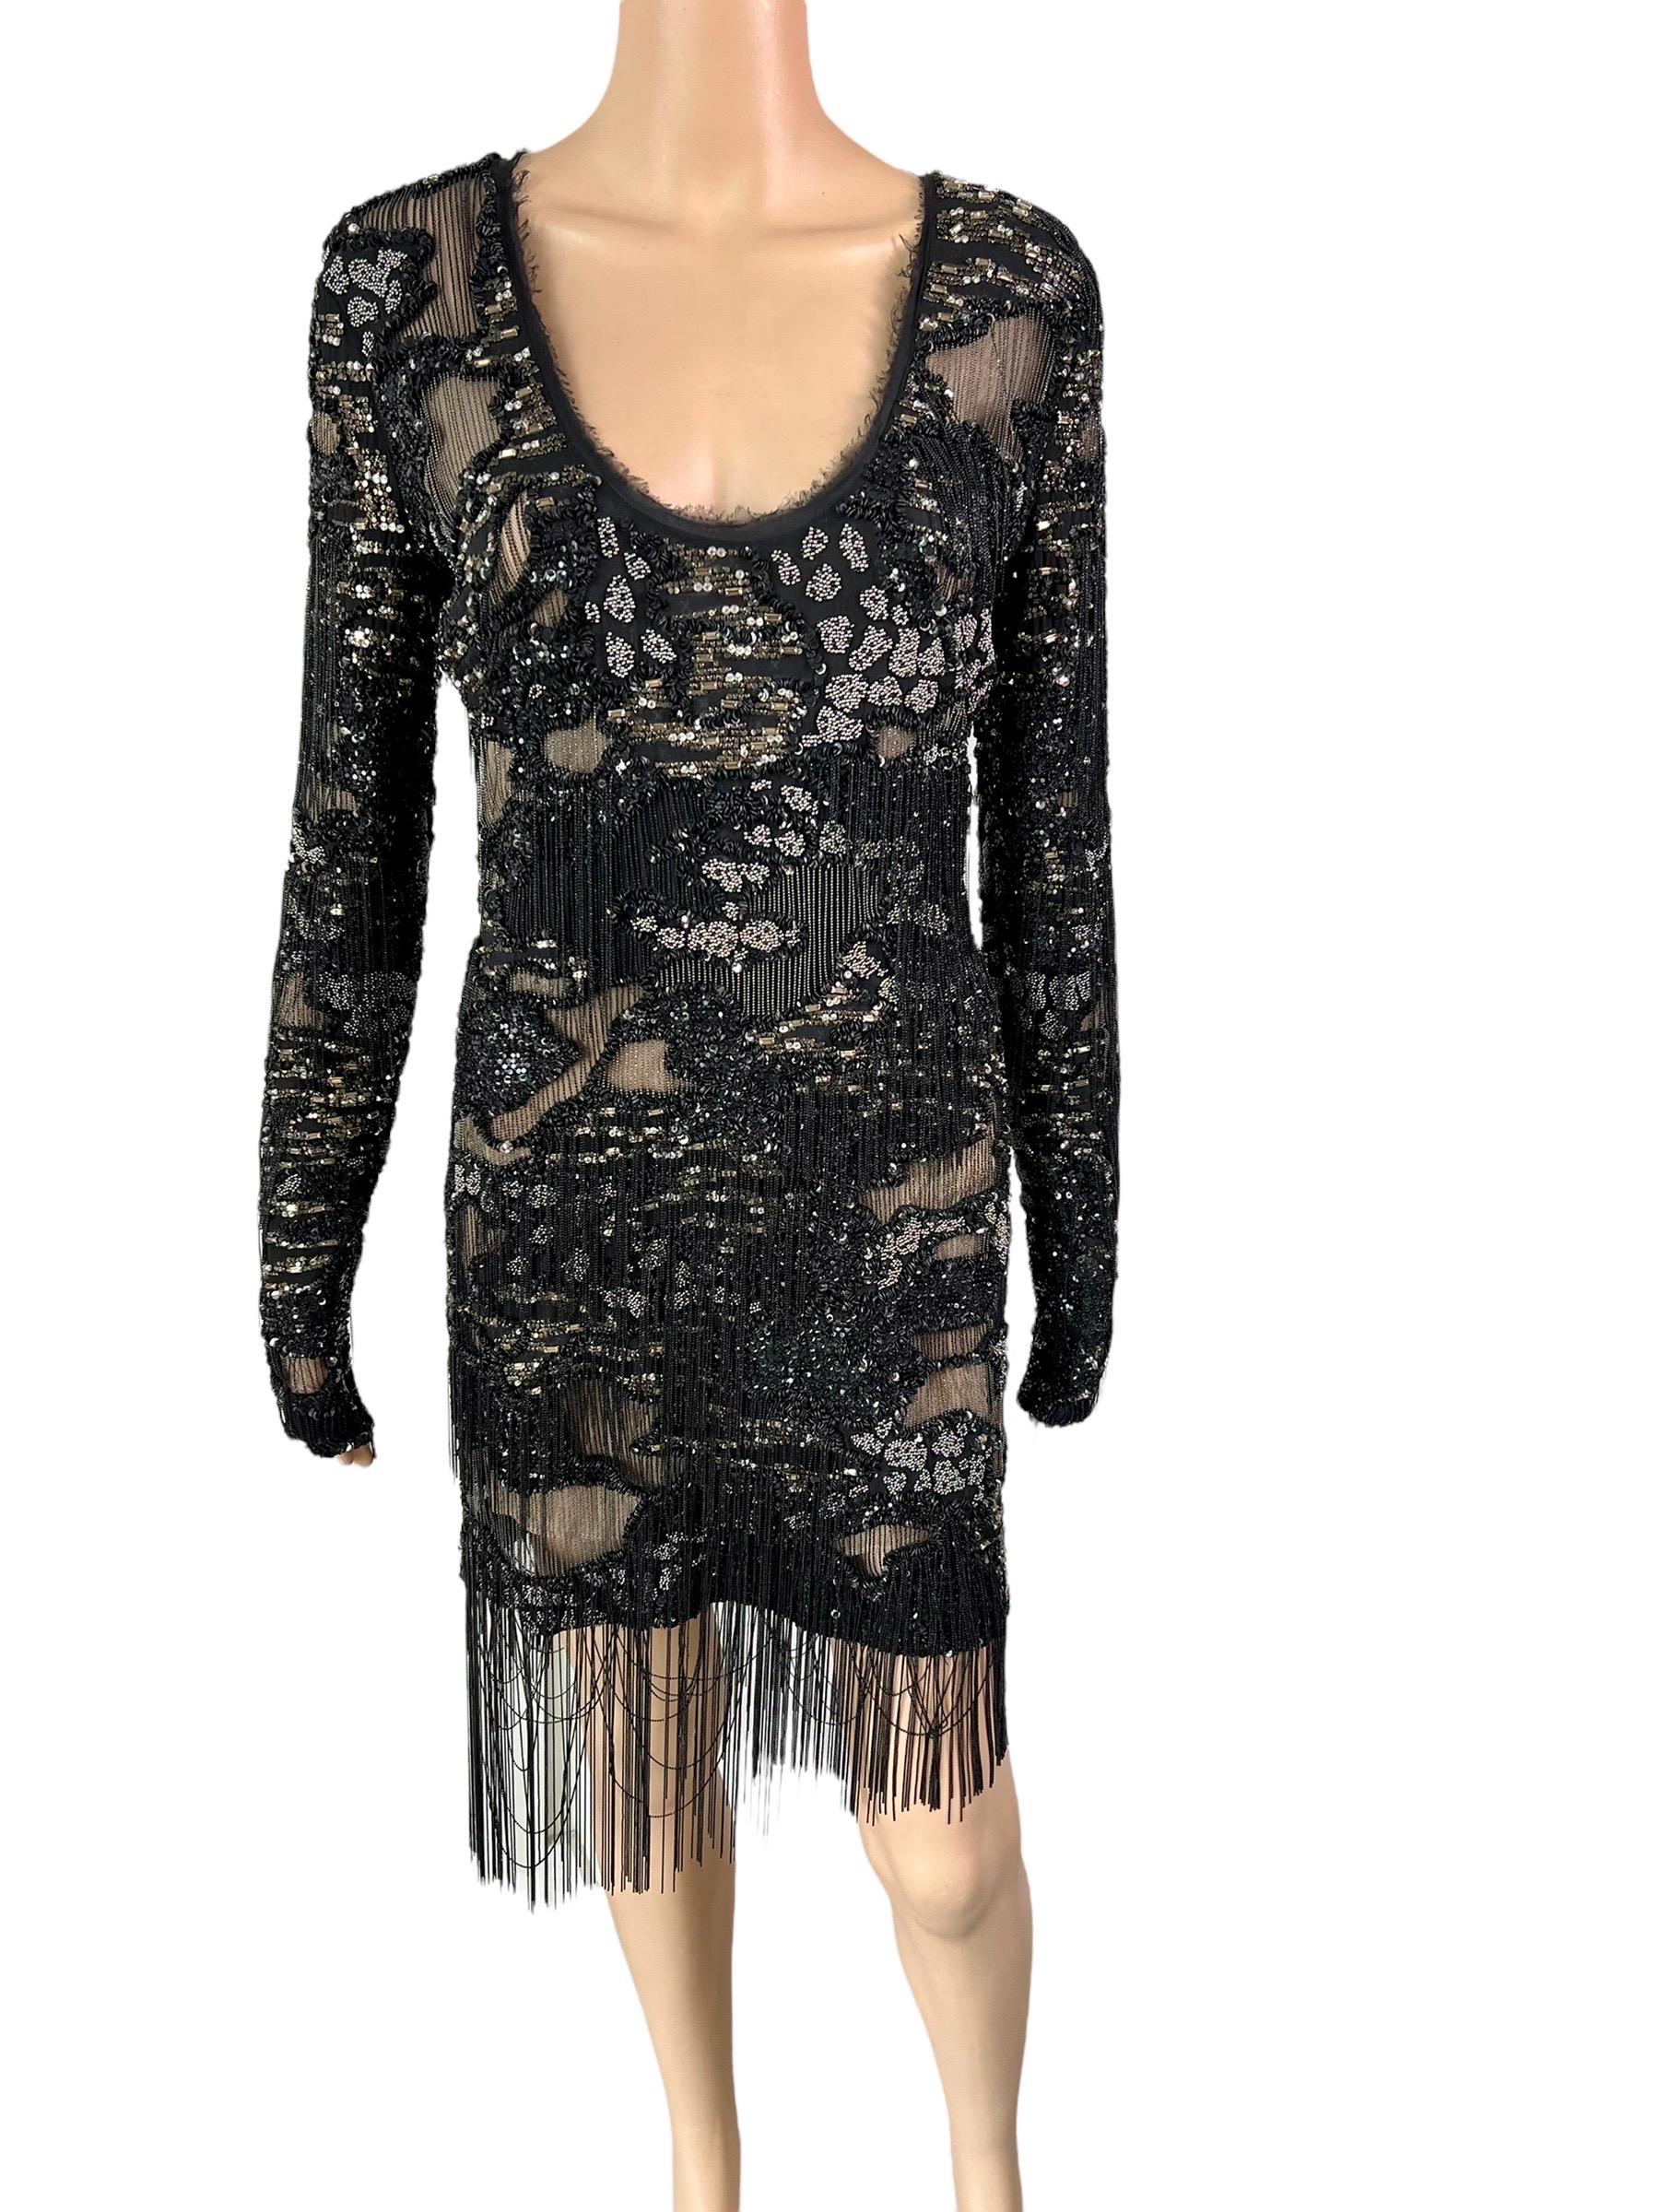 Roberto Cavalli S/S 2016 Runway Embellished Chain Sheer Cutouts Black Mini Evening Dress IT 40

New with Tags

Retail $11,985 

